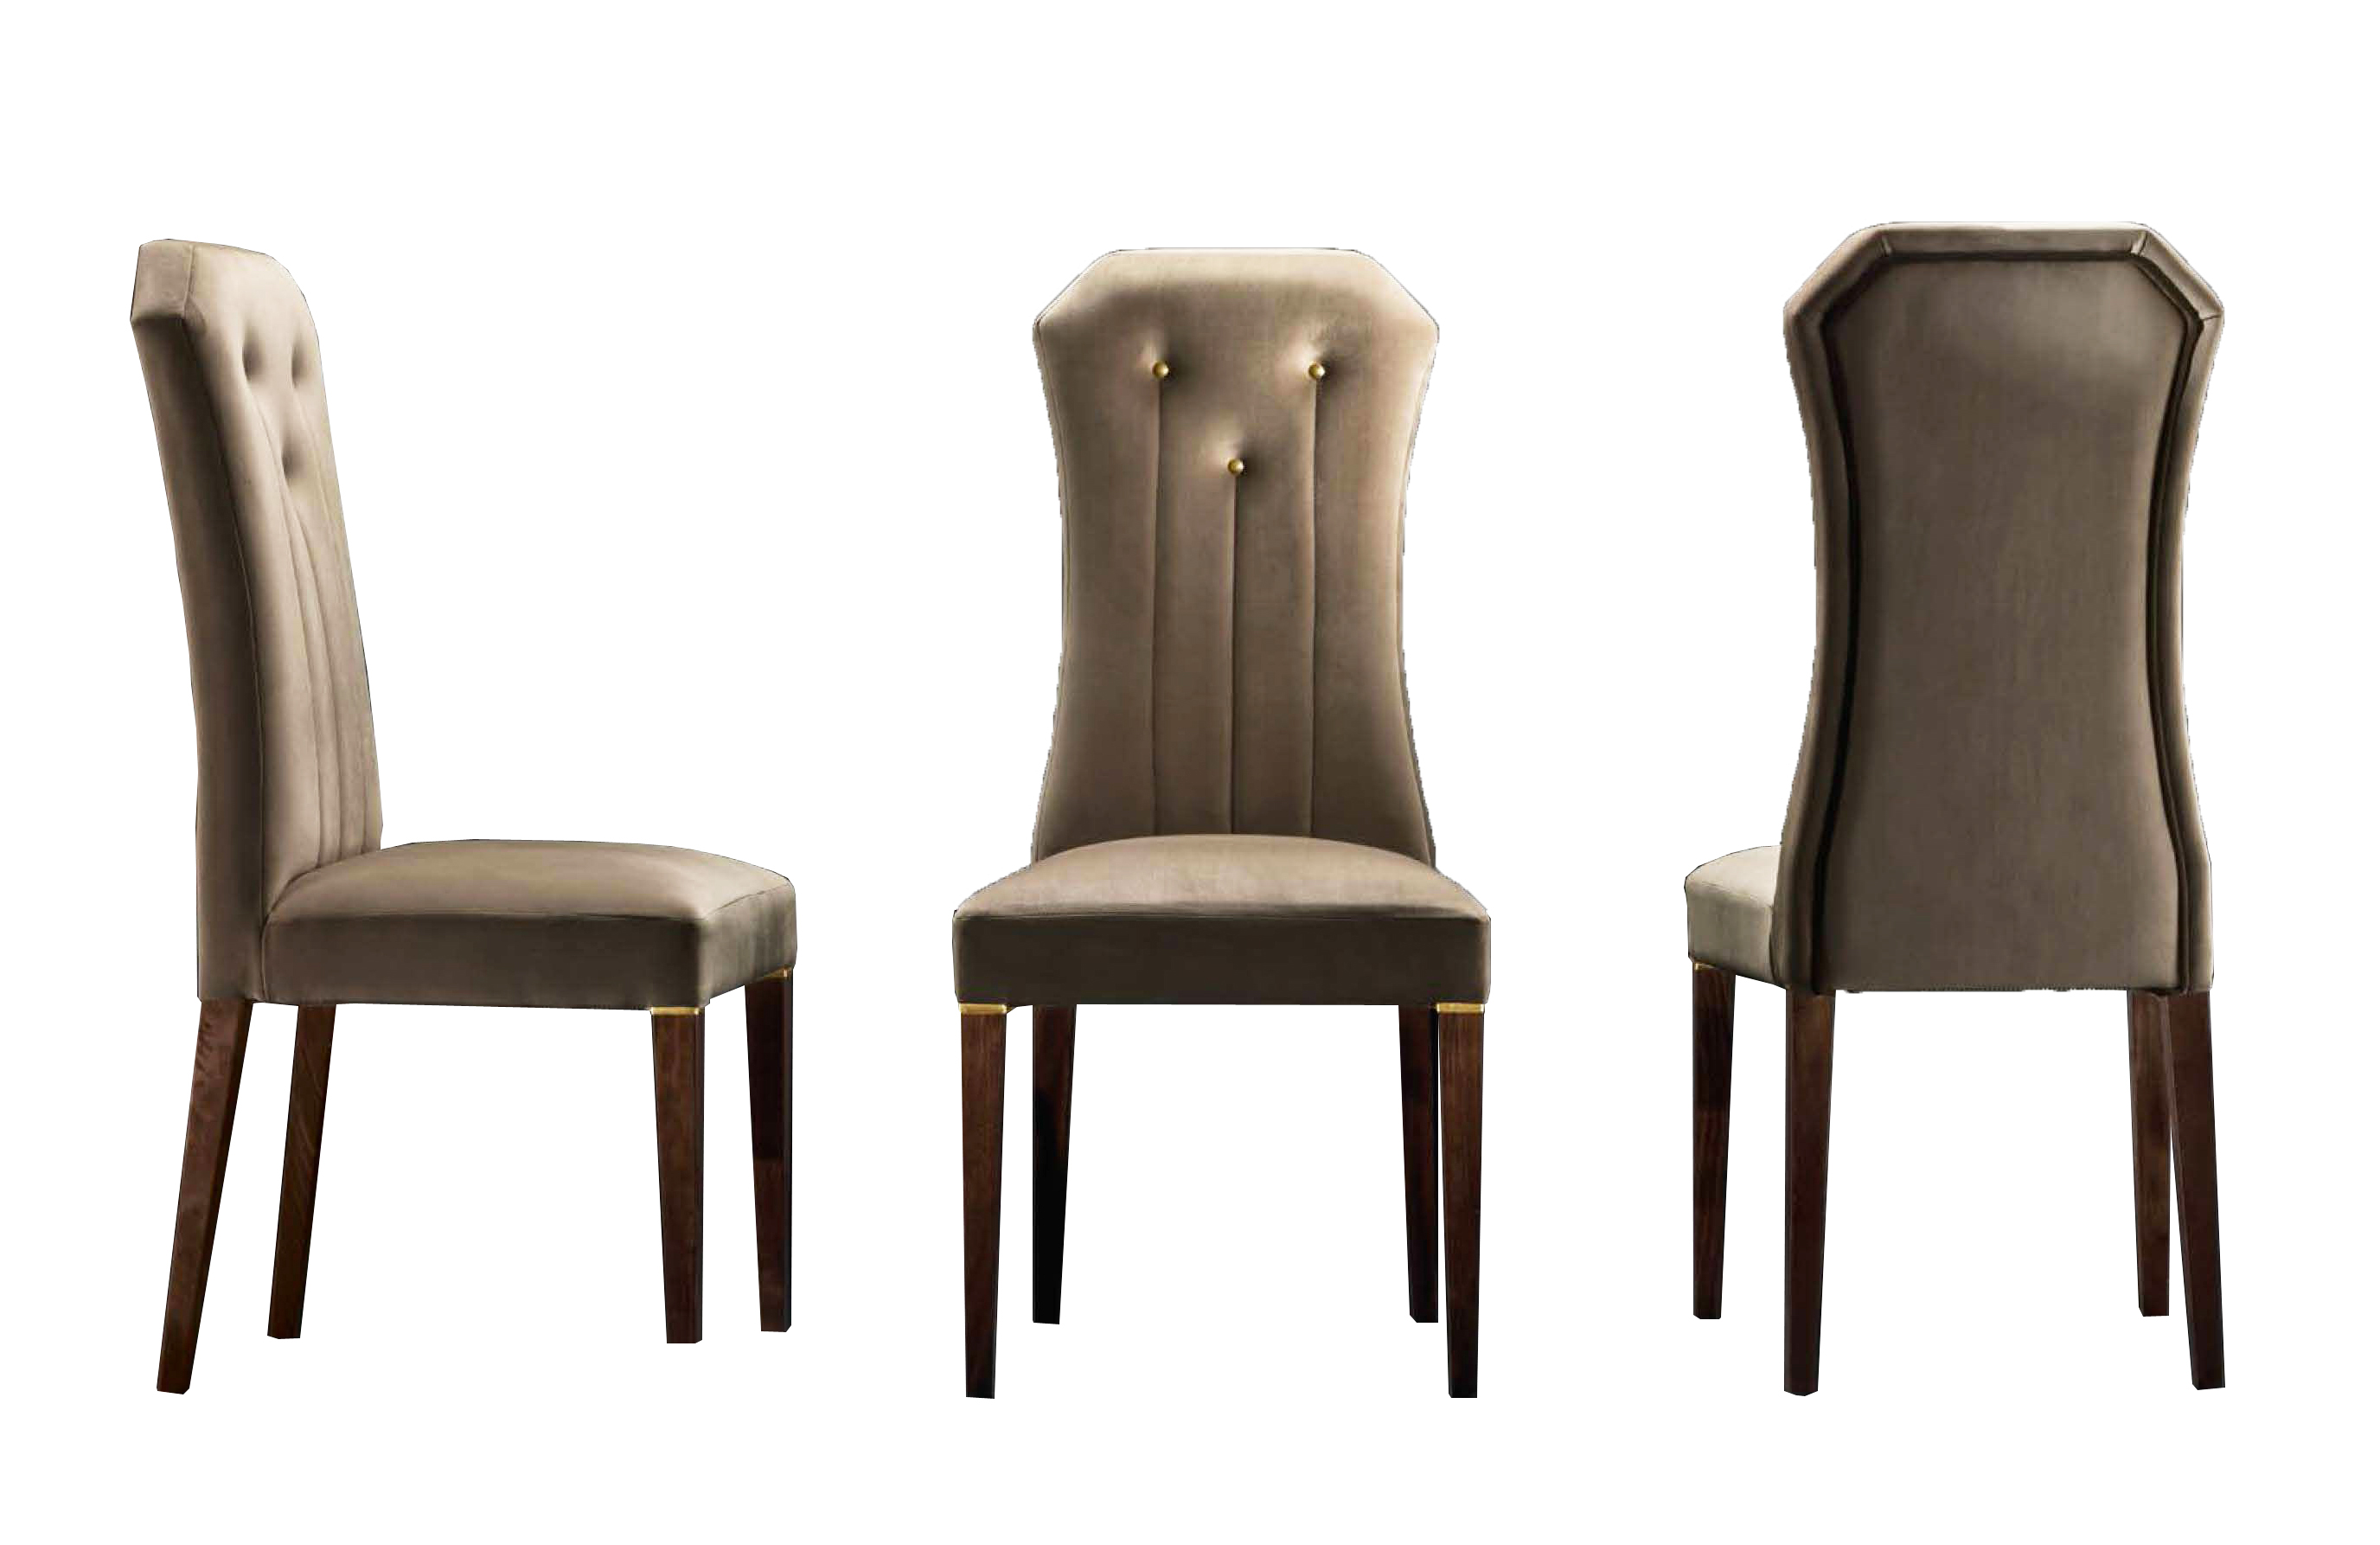 Dining Room Furniture Classic Dining Room Sets Diamante Dining Chair by Arredoclassic